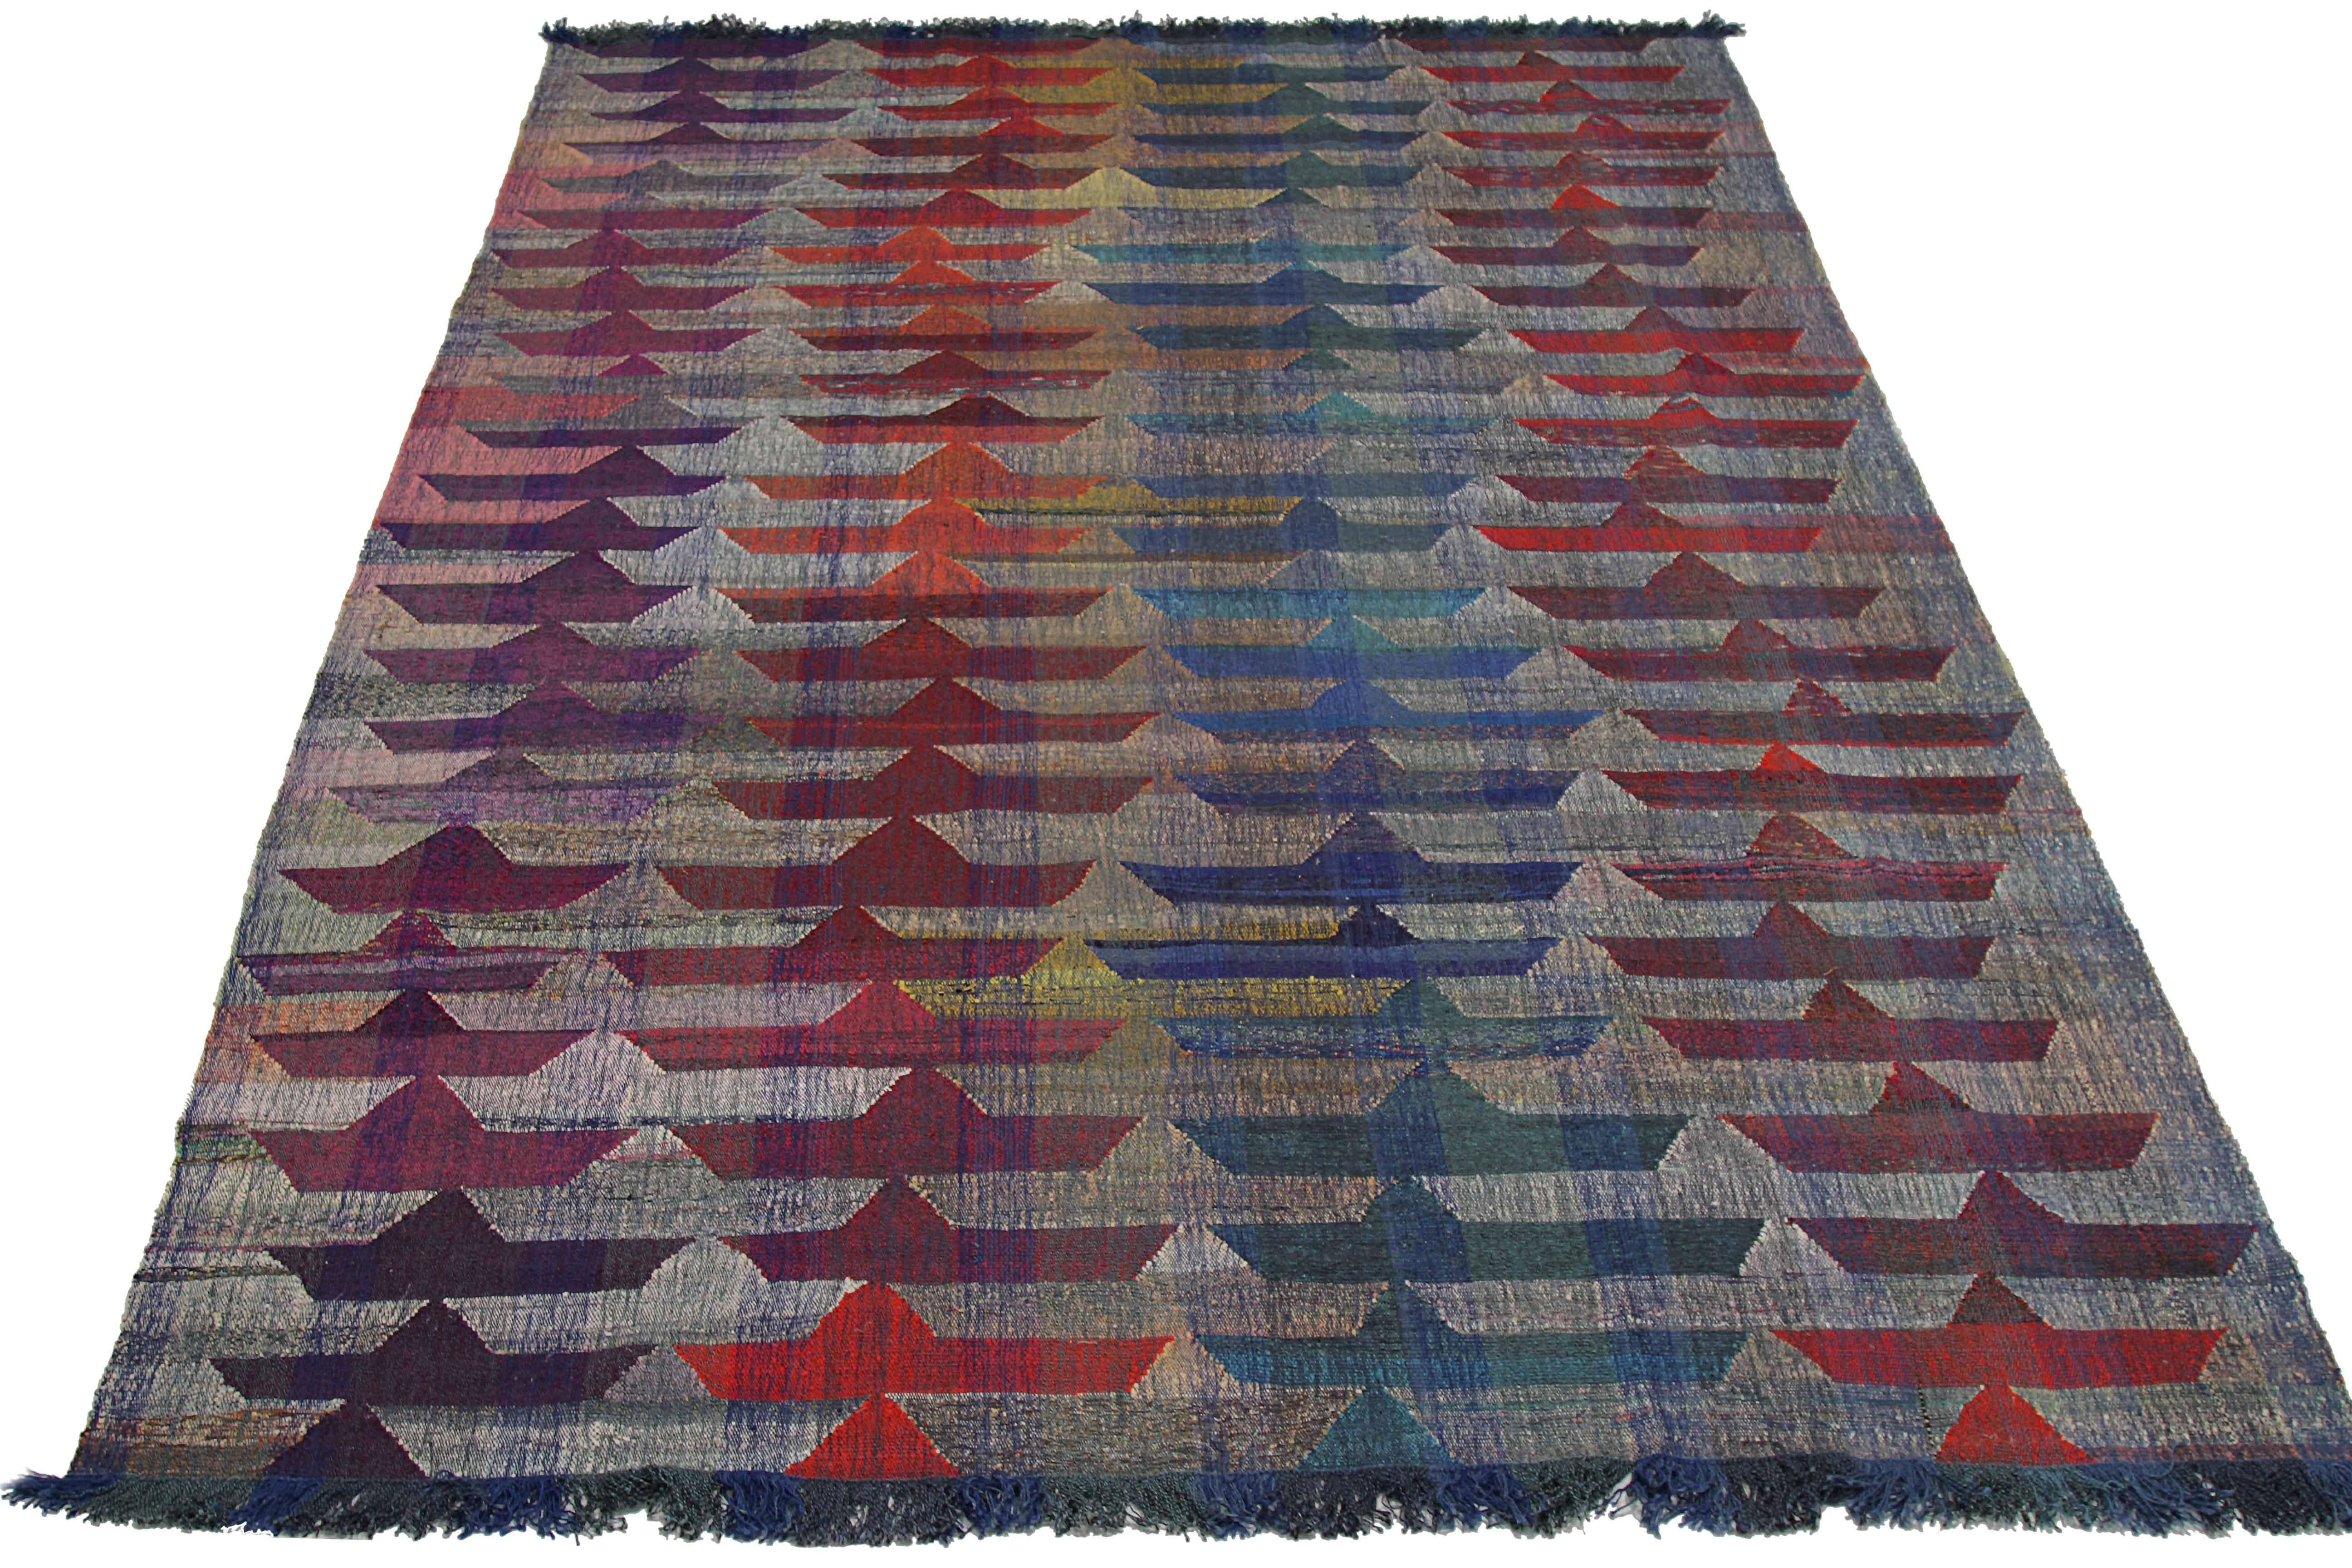 New Turkish rug handwoven from wool taken from antique fine carpets. 
It’s a traditional Kilim weaving featuring paper boat patterns in vibrant colors over an ivory field. It’s a stunning piece to get for contemporary and modern spaces. It has a